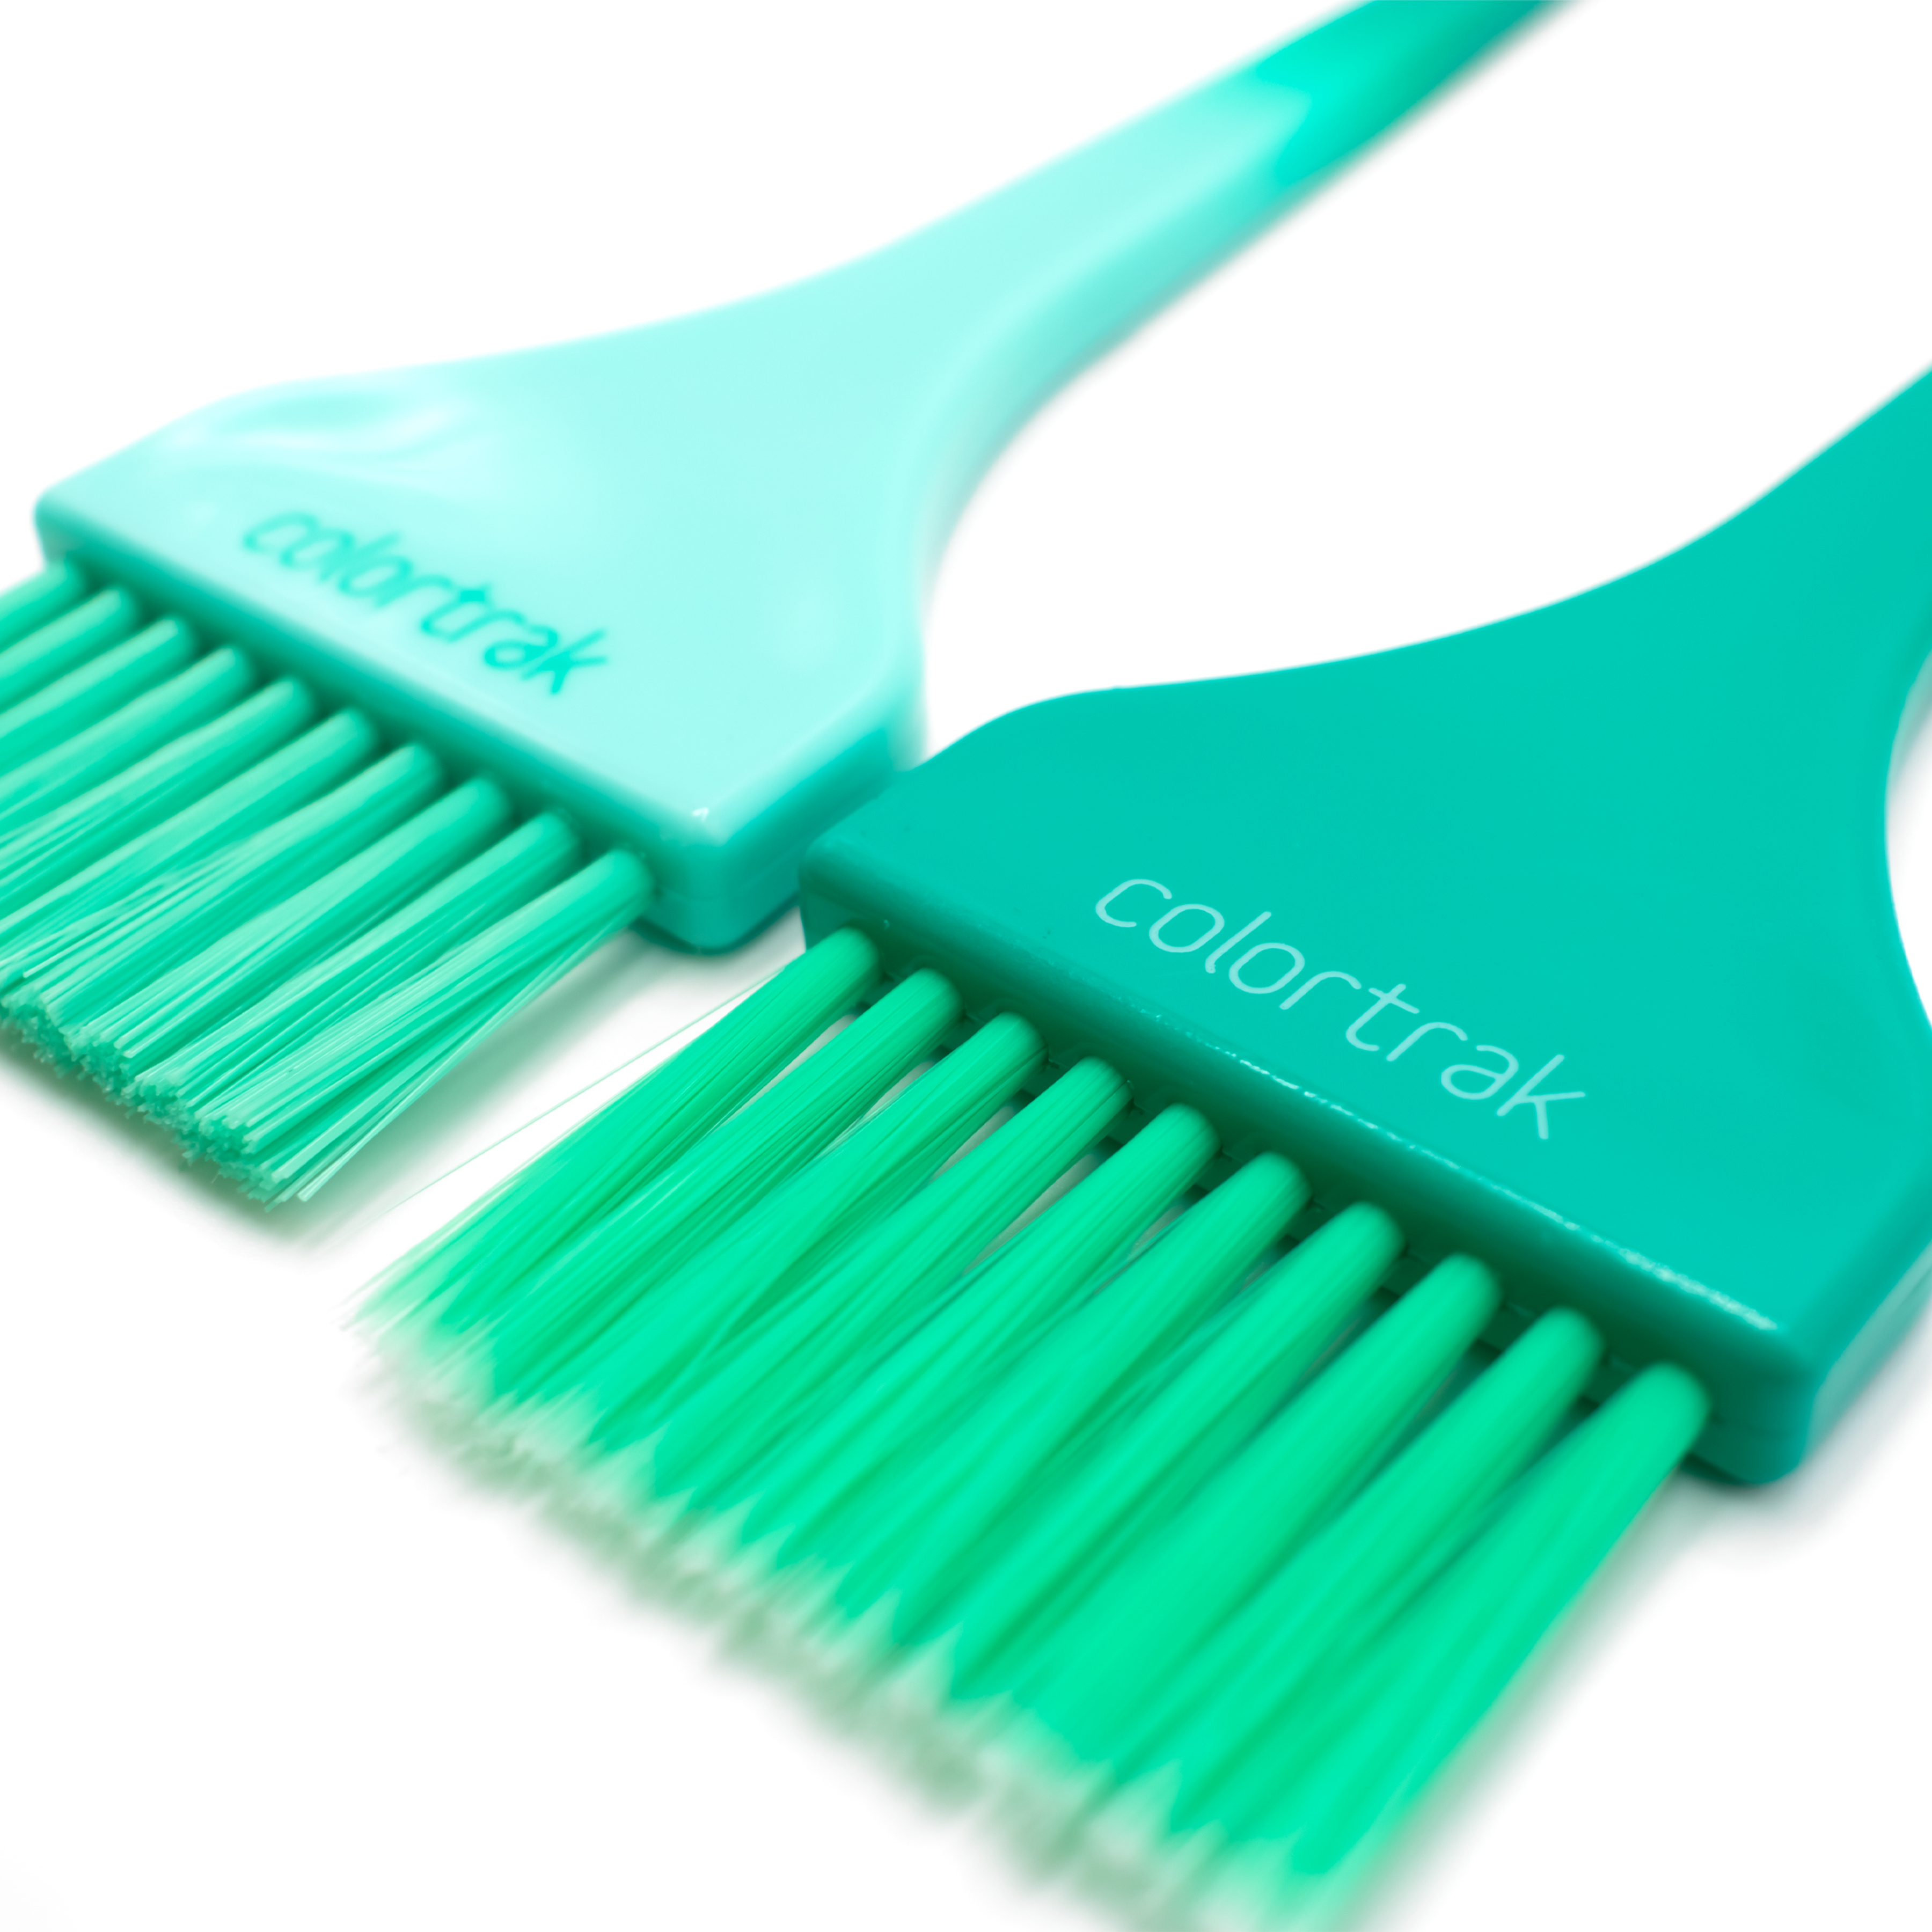 Hair Dye Brush with Comb